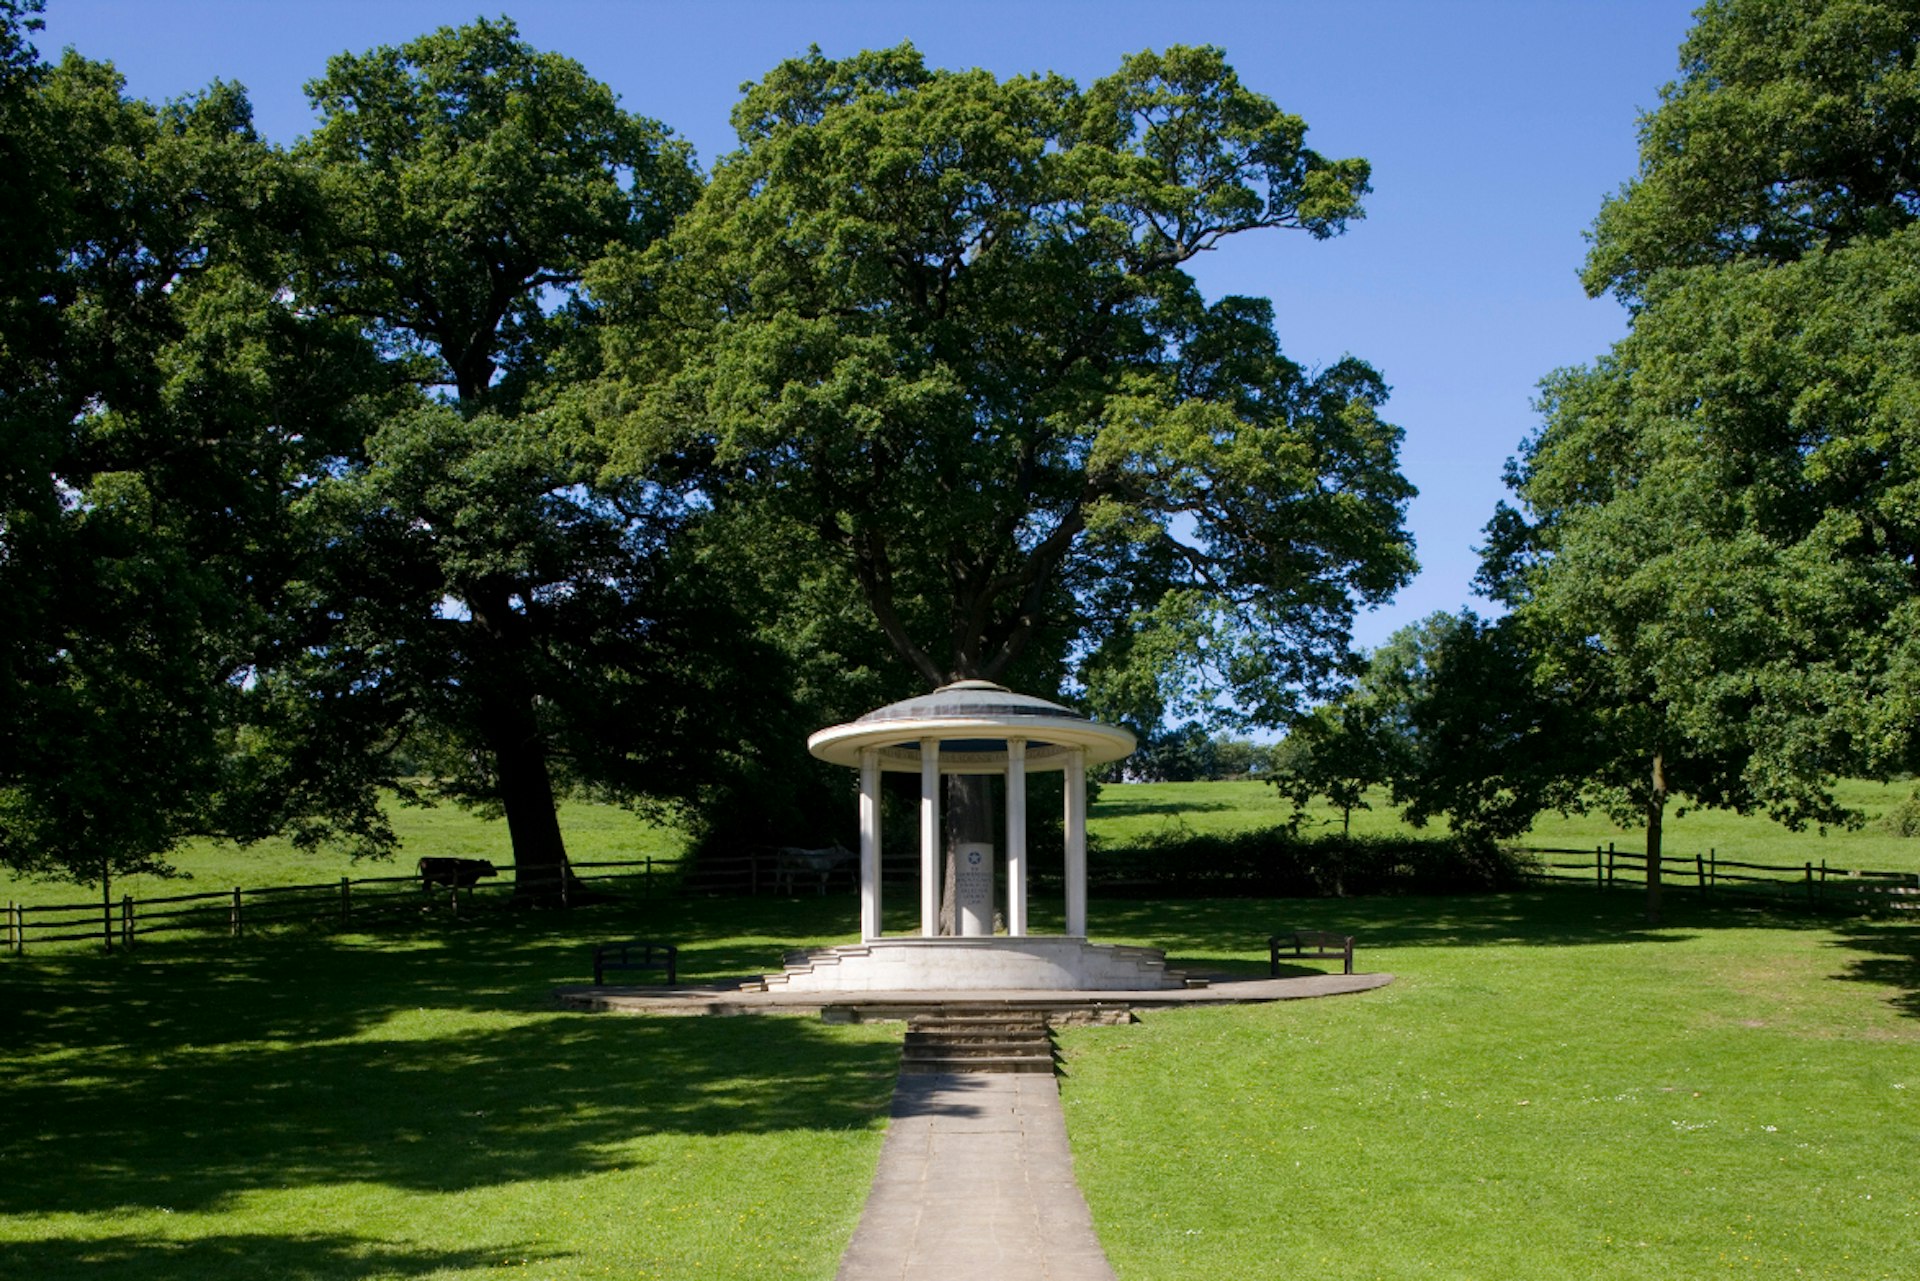 The neoclassical temple (funded by the American Bar Association) at Runnymede. Image by G Jackson / Getty